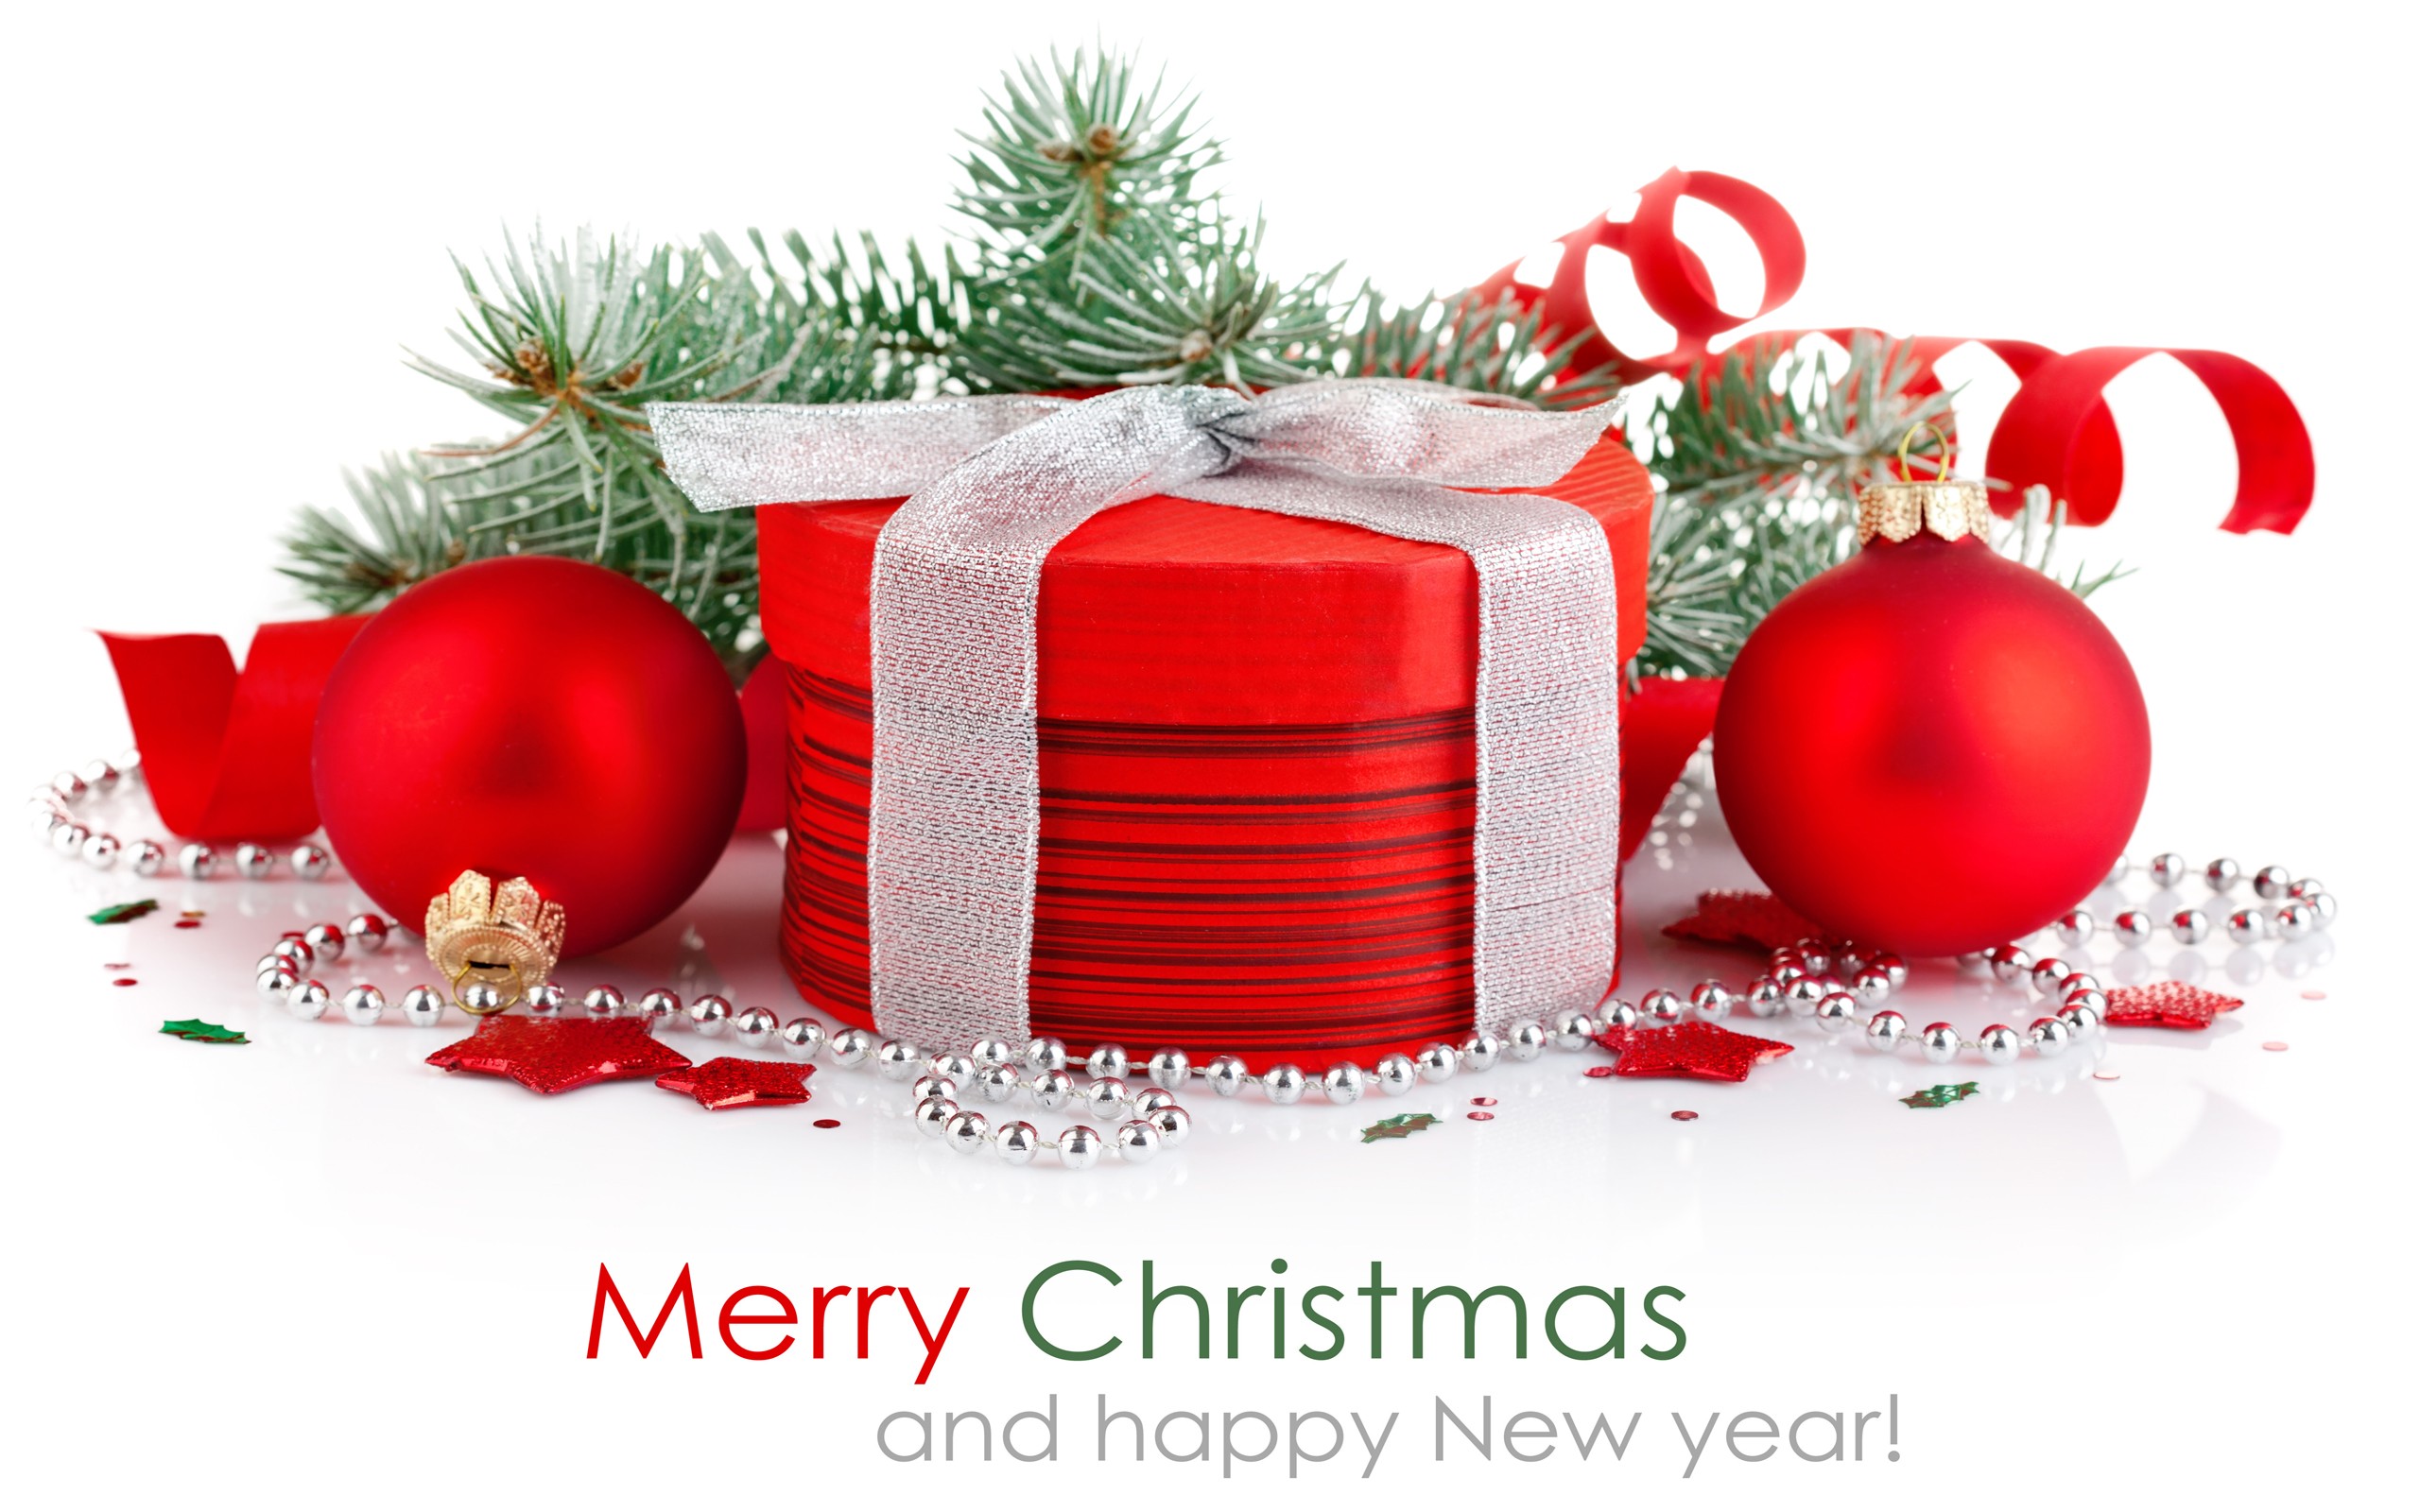 Happy New Year Merry Christmas 2021 Greeting Wallpapers